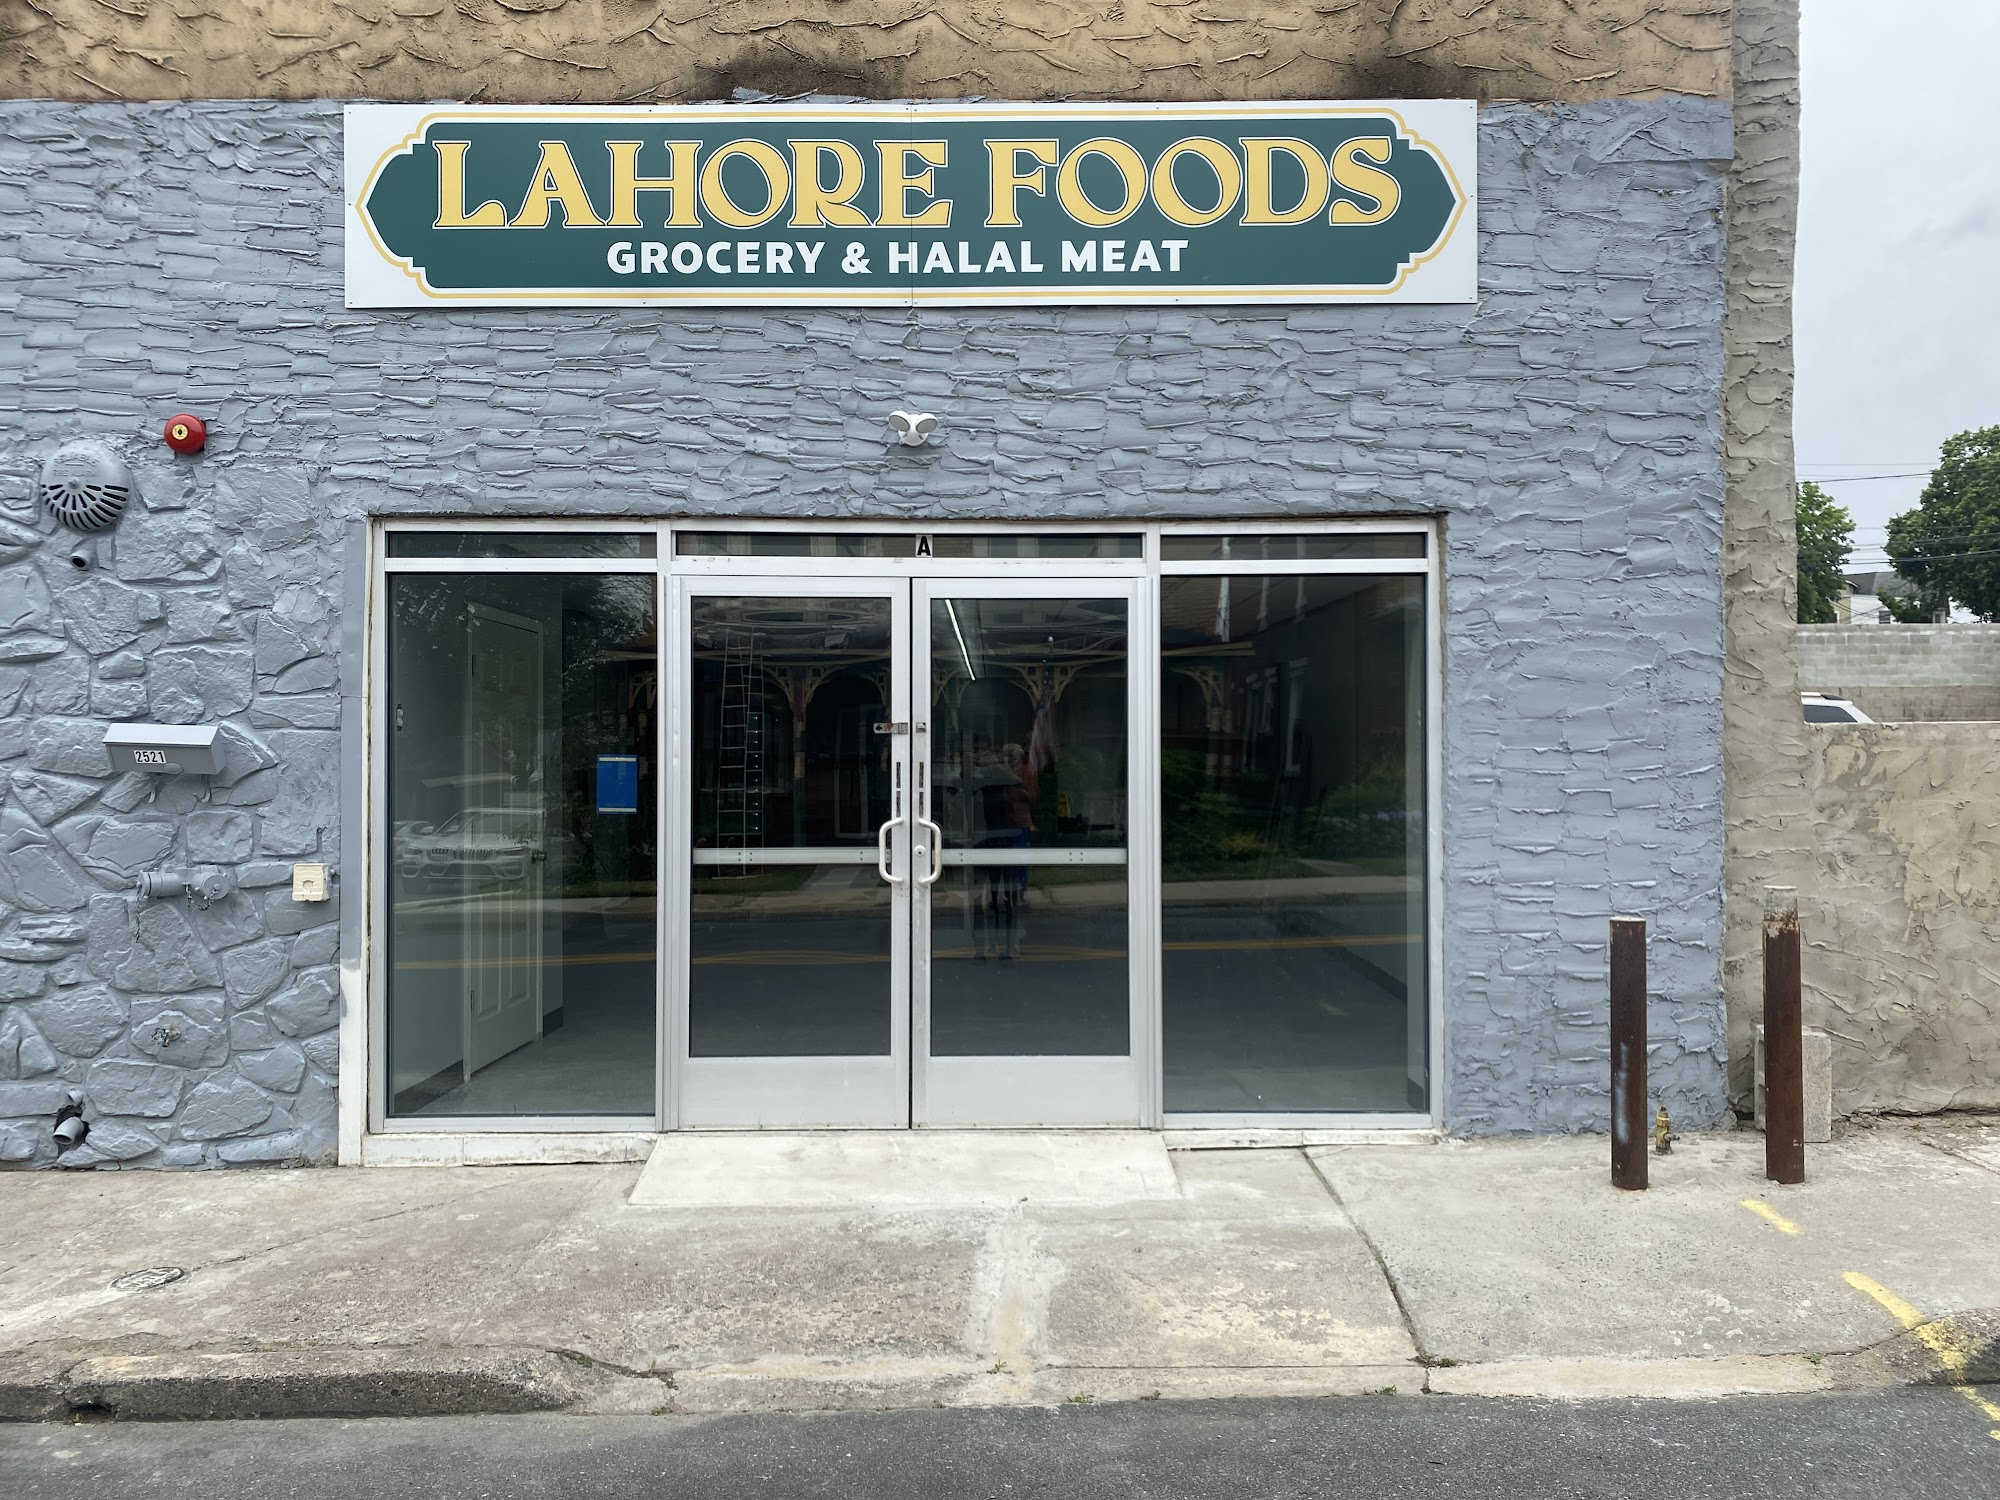 Lahore Foods Grocery & Halal Meat